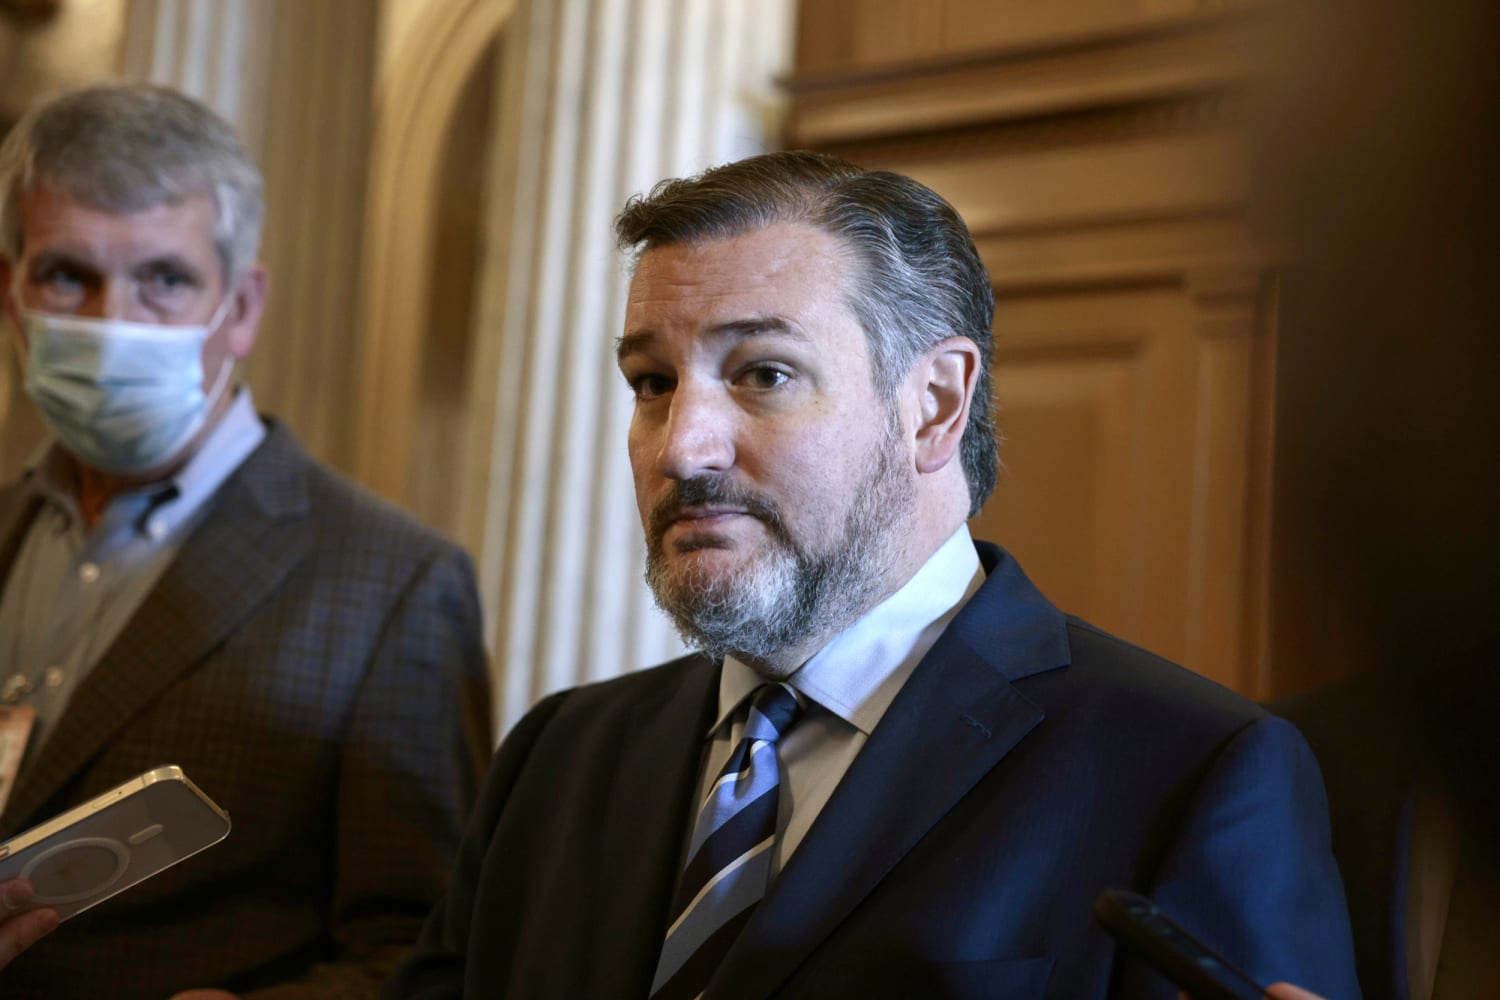 Cruz says in Fox News interview it was a ‘mistake’ for him to call Jan. 6 a ‘terrorist attack’